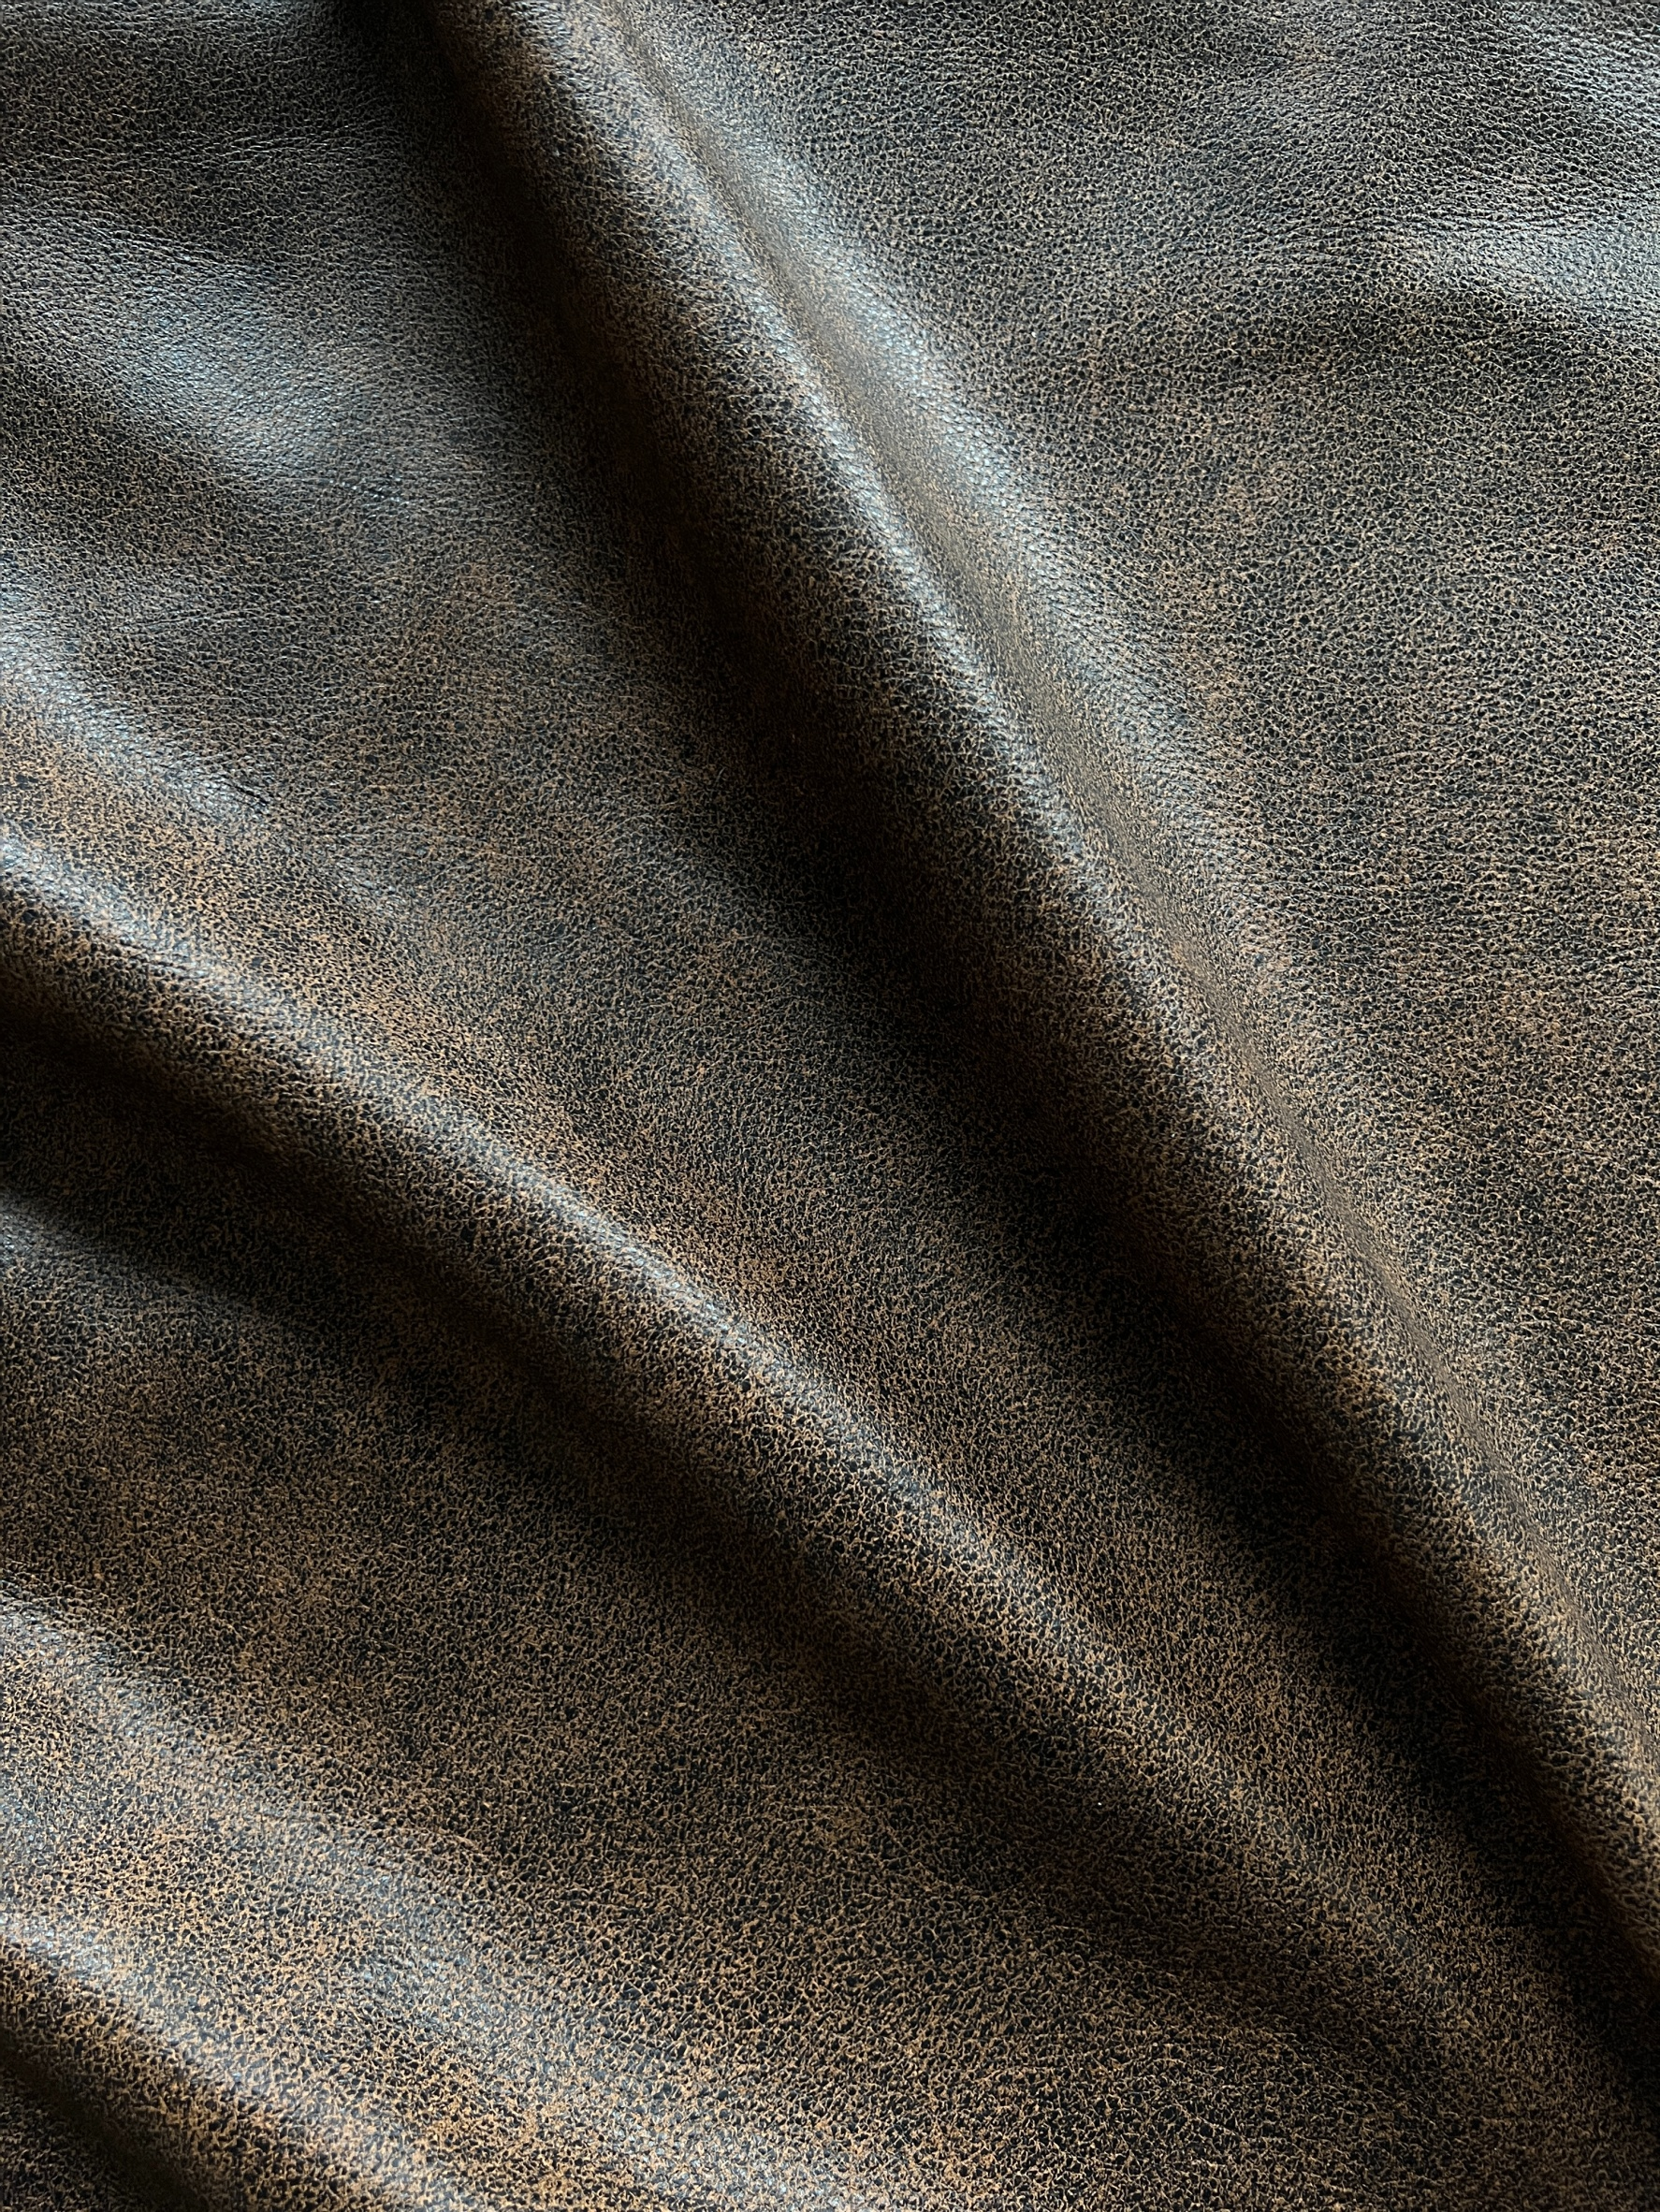 Luggage Distressed Cow Leather Whole Hide (Upholstery Leather) – TanneryNYC